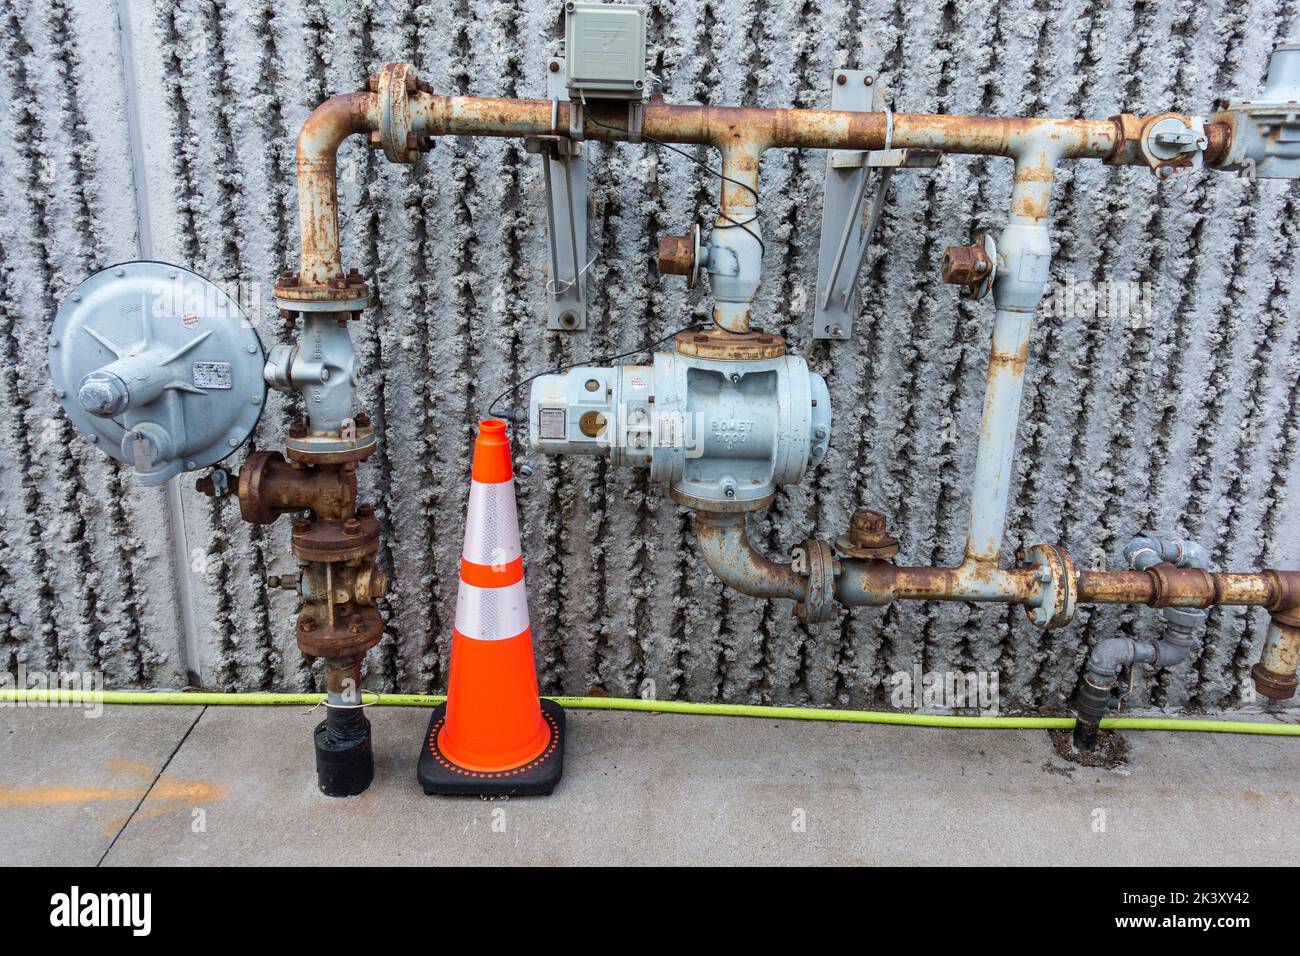 Working gas valve with connecting rusty pipes protected by an orange cone. Minneapolis Minnesota MN USA Stock Photo